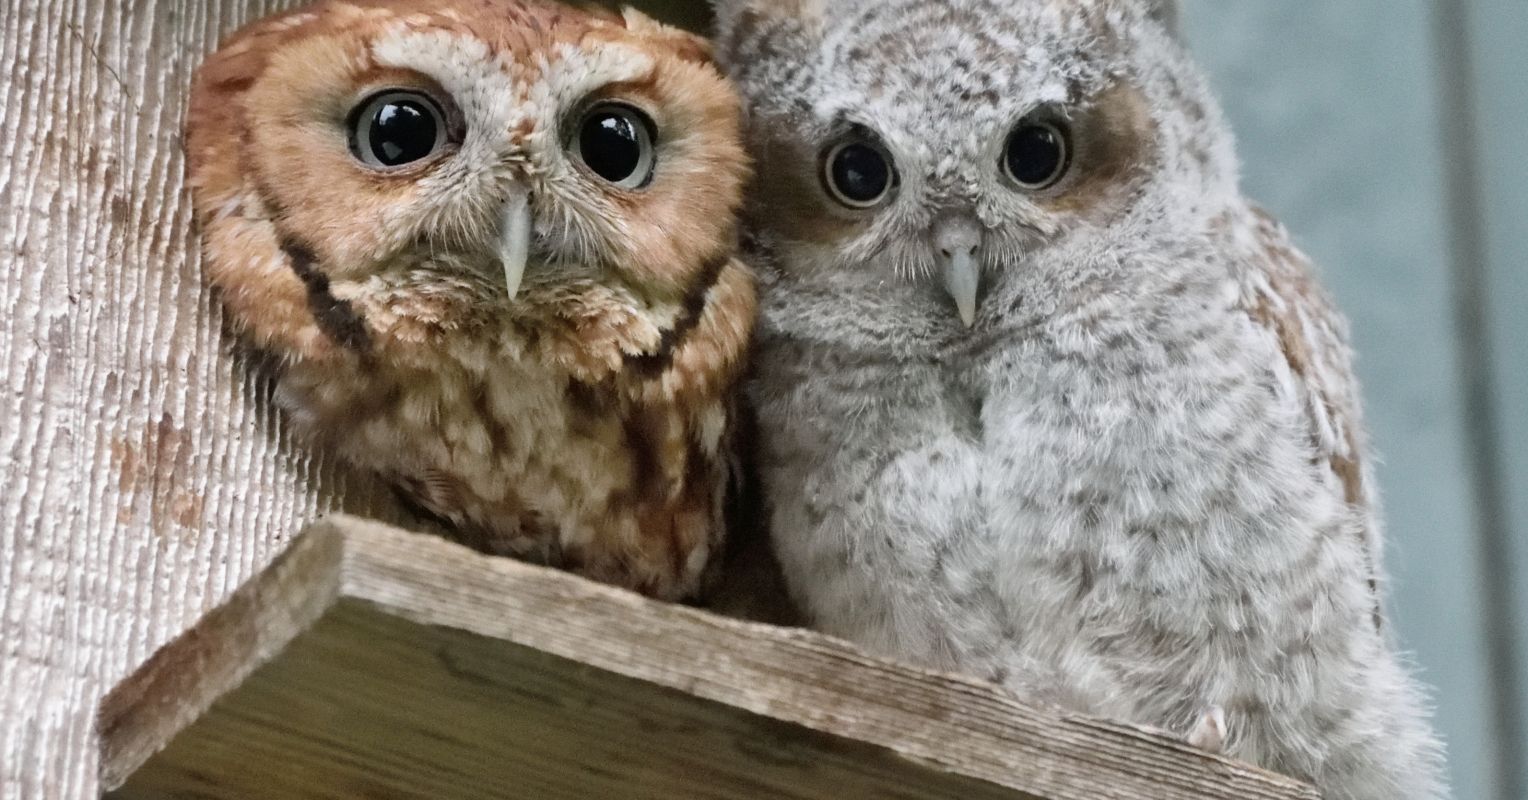 The Deep Bond Between an Ecologist and a Rescued Screech Owl